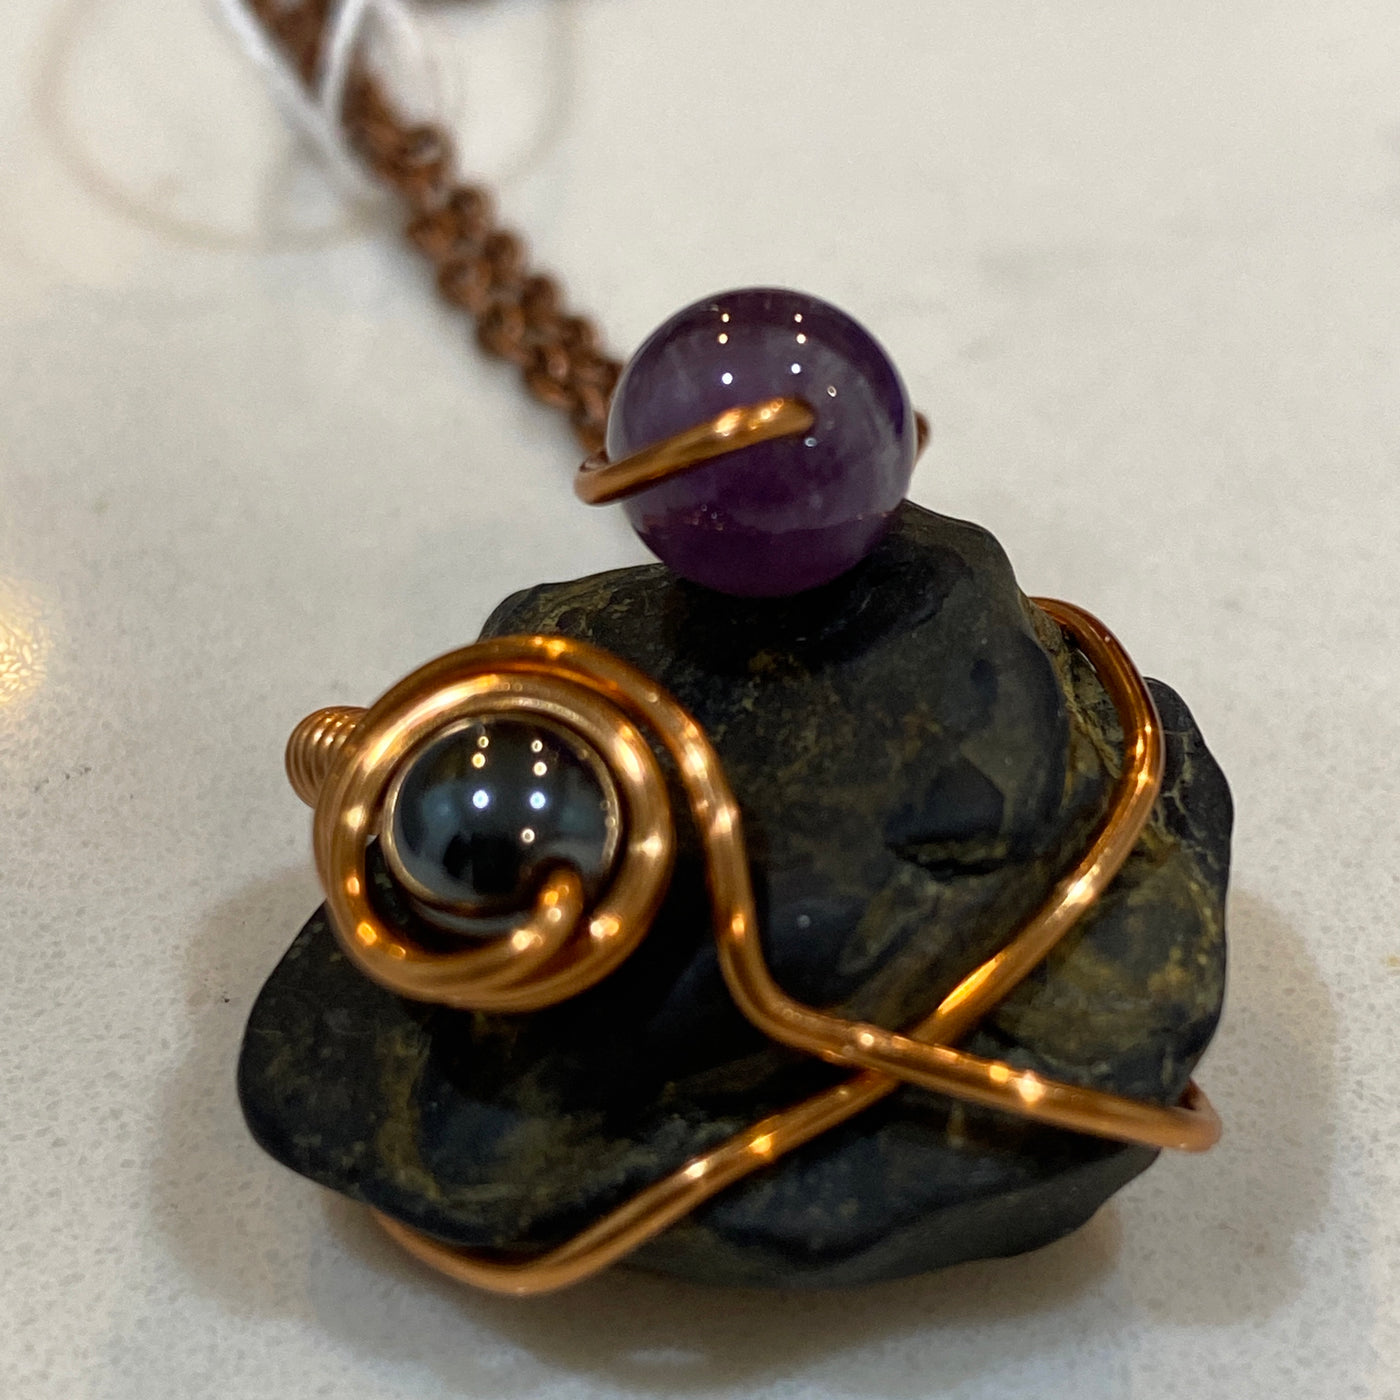 Black natural stone, amethyst, black stone and wire on chain. Small pendant.